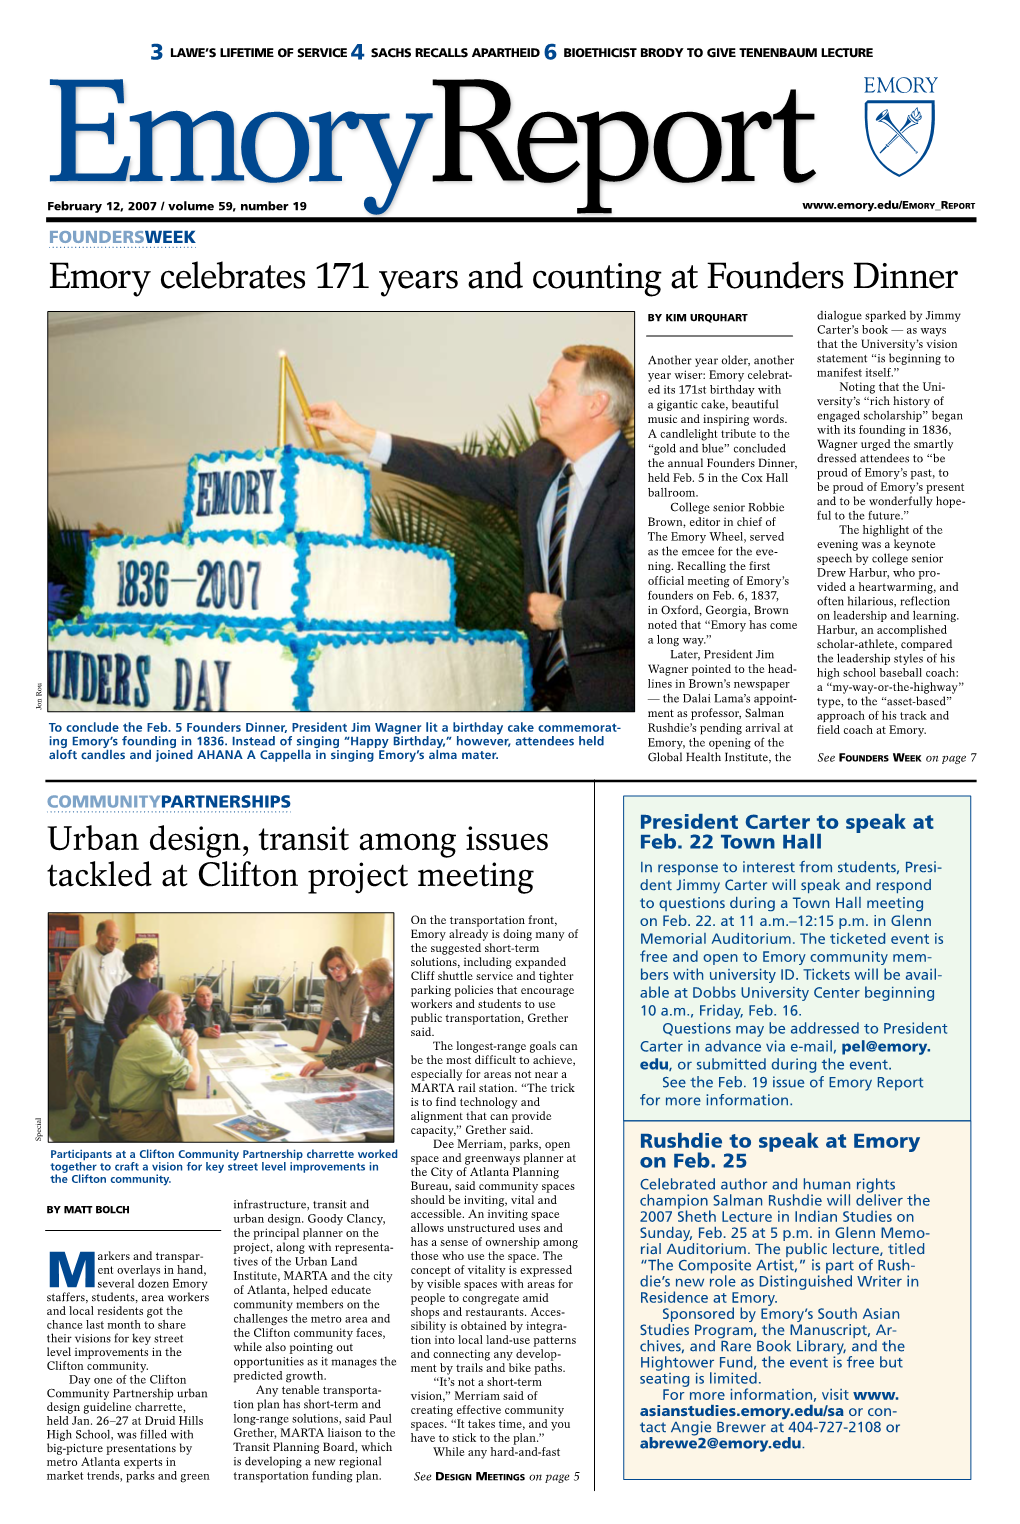 Emory Celebrates 171 Years and Counting at Founders Dinner